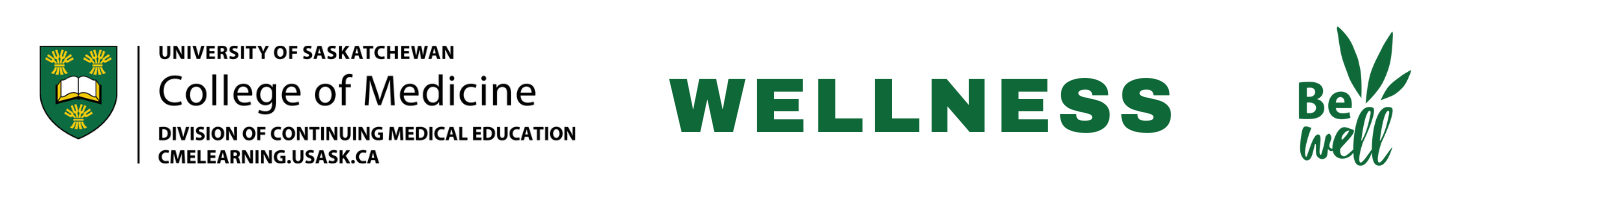 wellness-sub-banner-1600--200-px-1.png